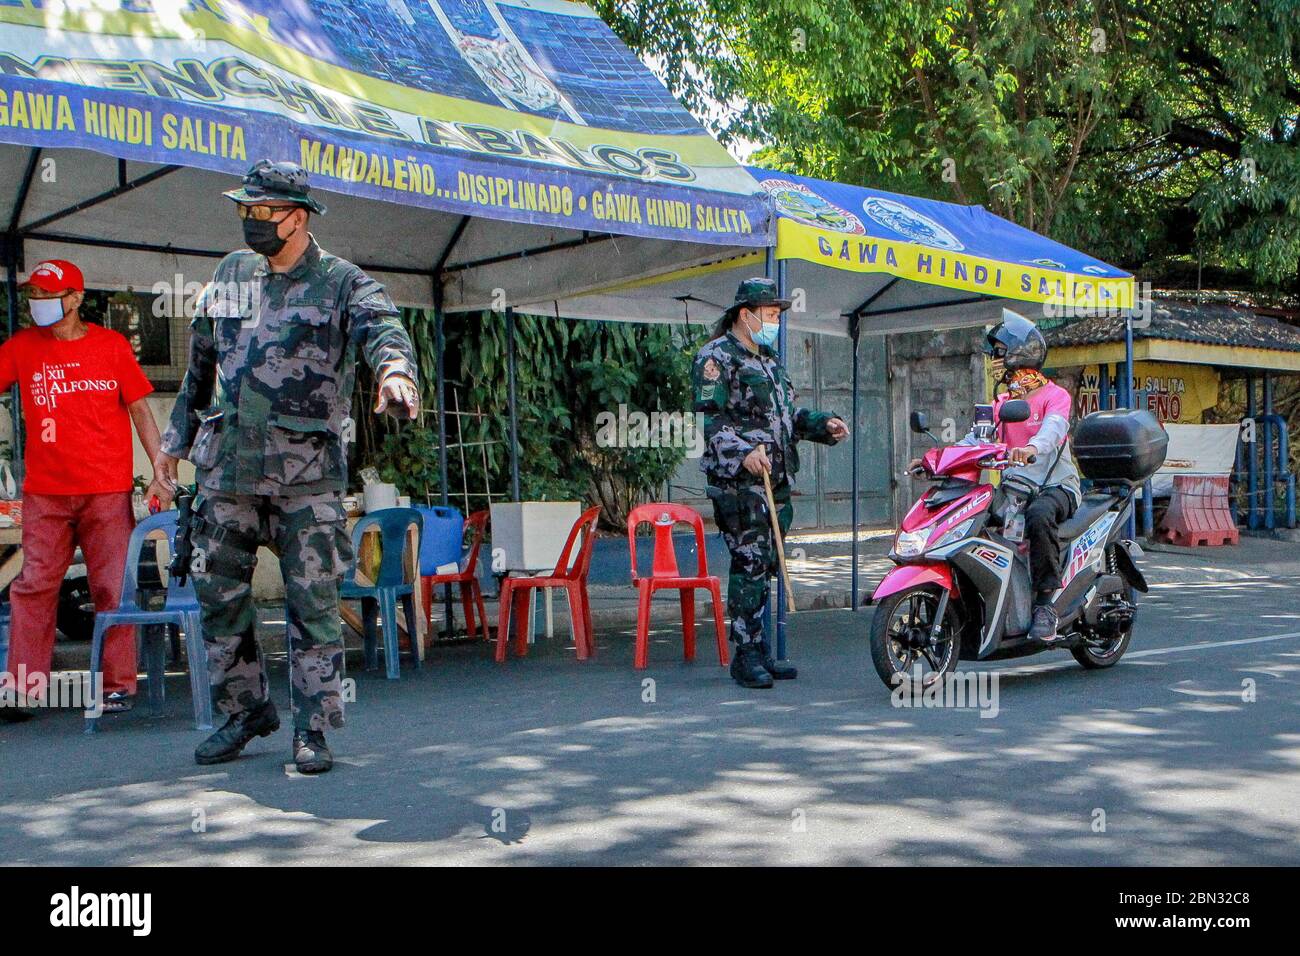 Mandaluyong City, Philippines. 12th May, 2020. Police officers work at a village under lockdown in Mandaluyong City, the Philippines, on May 12, 2020. Philippine government announced on Tuesday that Metro Manila, Laguna province in the main island of Luzon, and Cebu City in the central Philippines will be placed under 'modified enhanced community quarantine' from May 16 to May 31, or after the lockdown period in many parts of the country lapses in May 15. Credit: Rouelle Umali/Xinhua/Alamy Live News Stock Photo